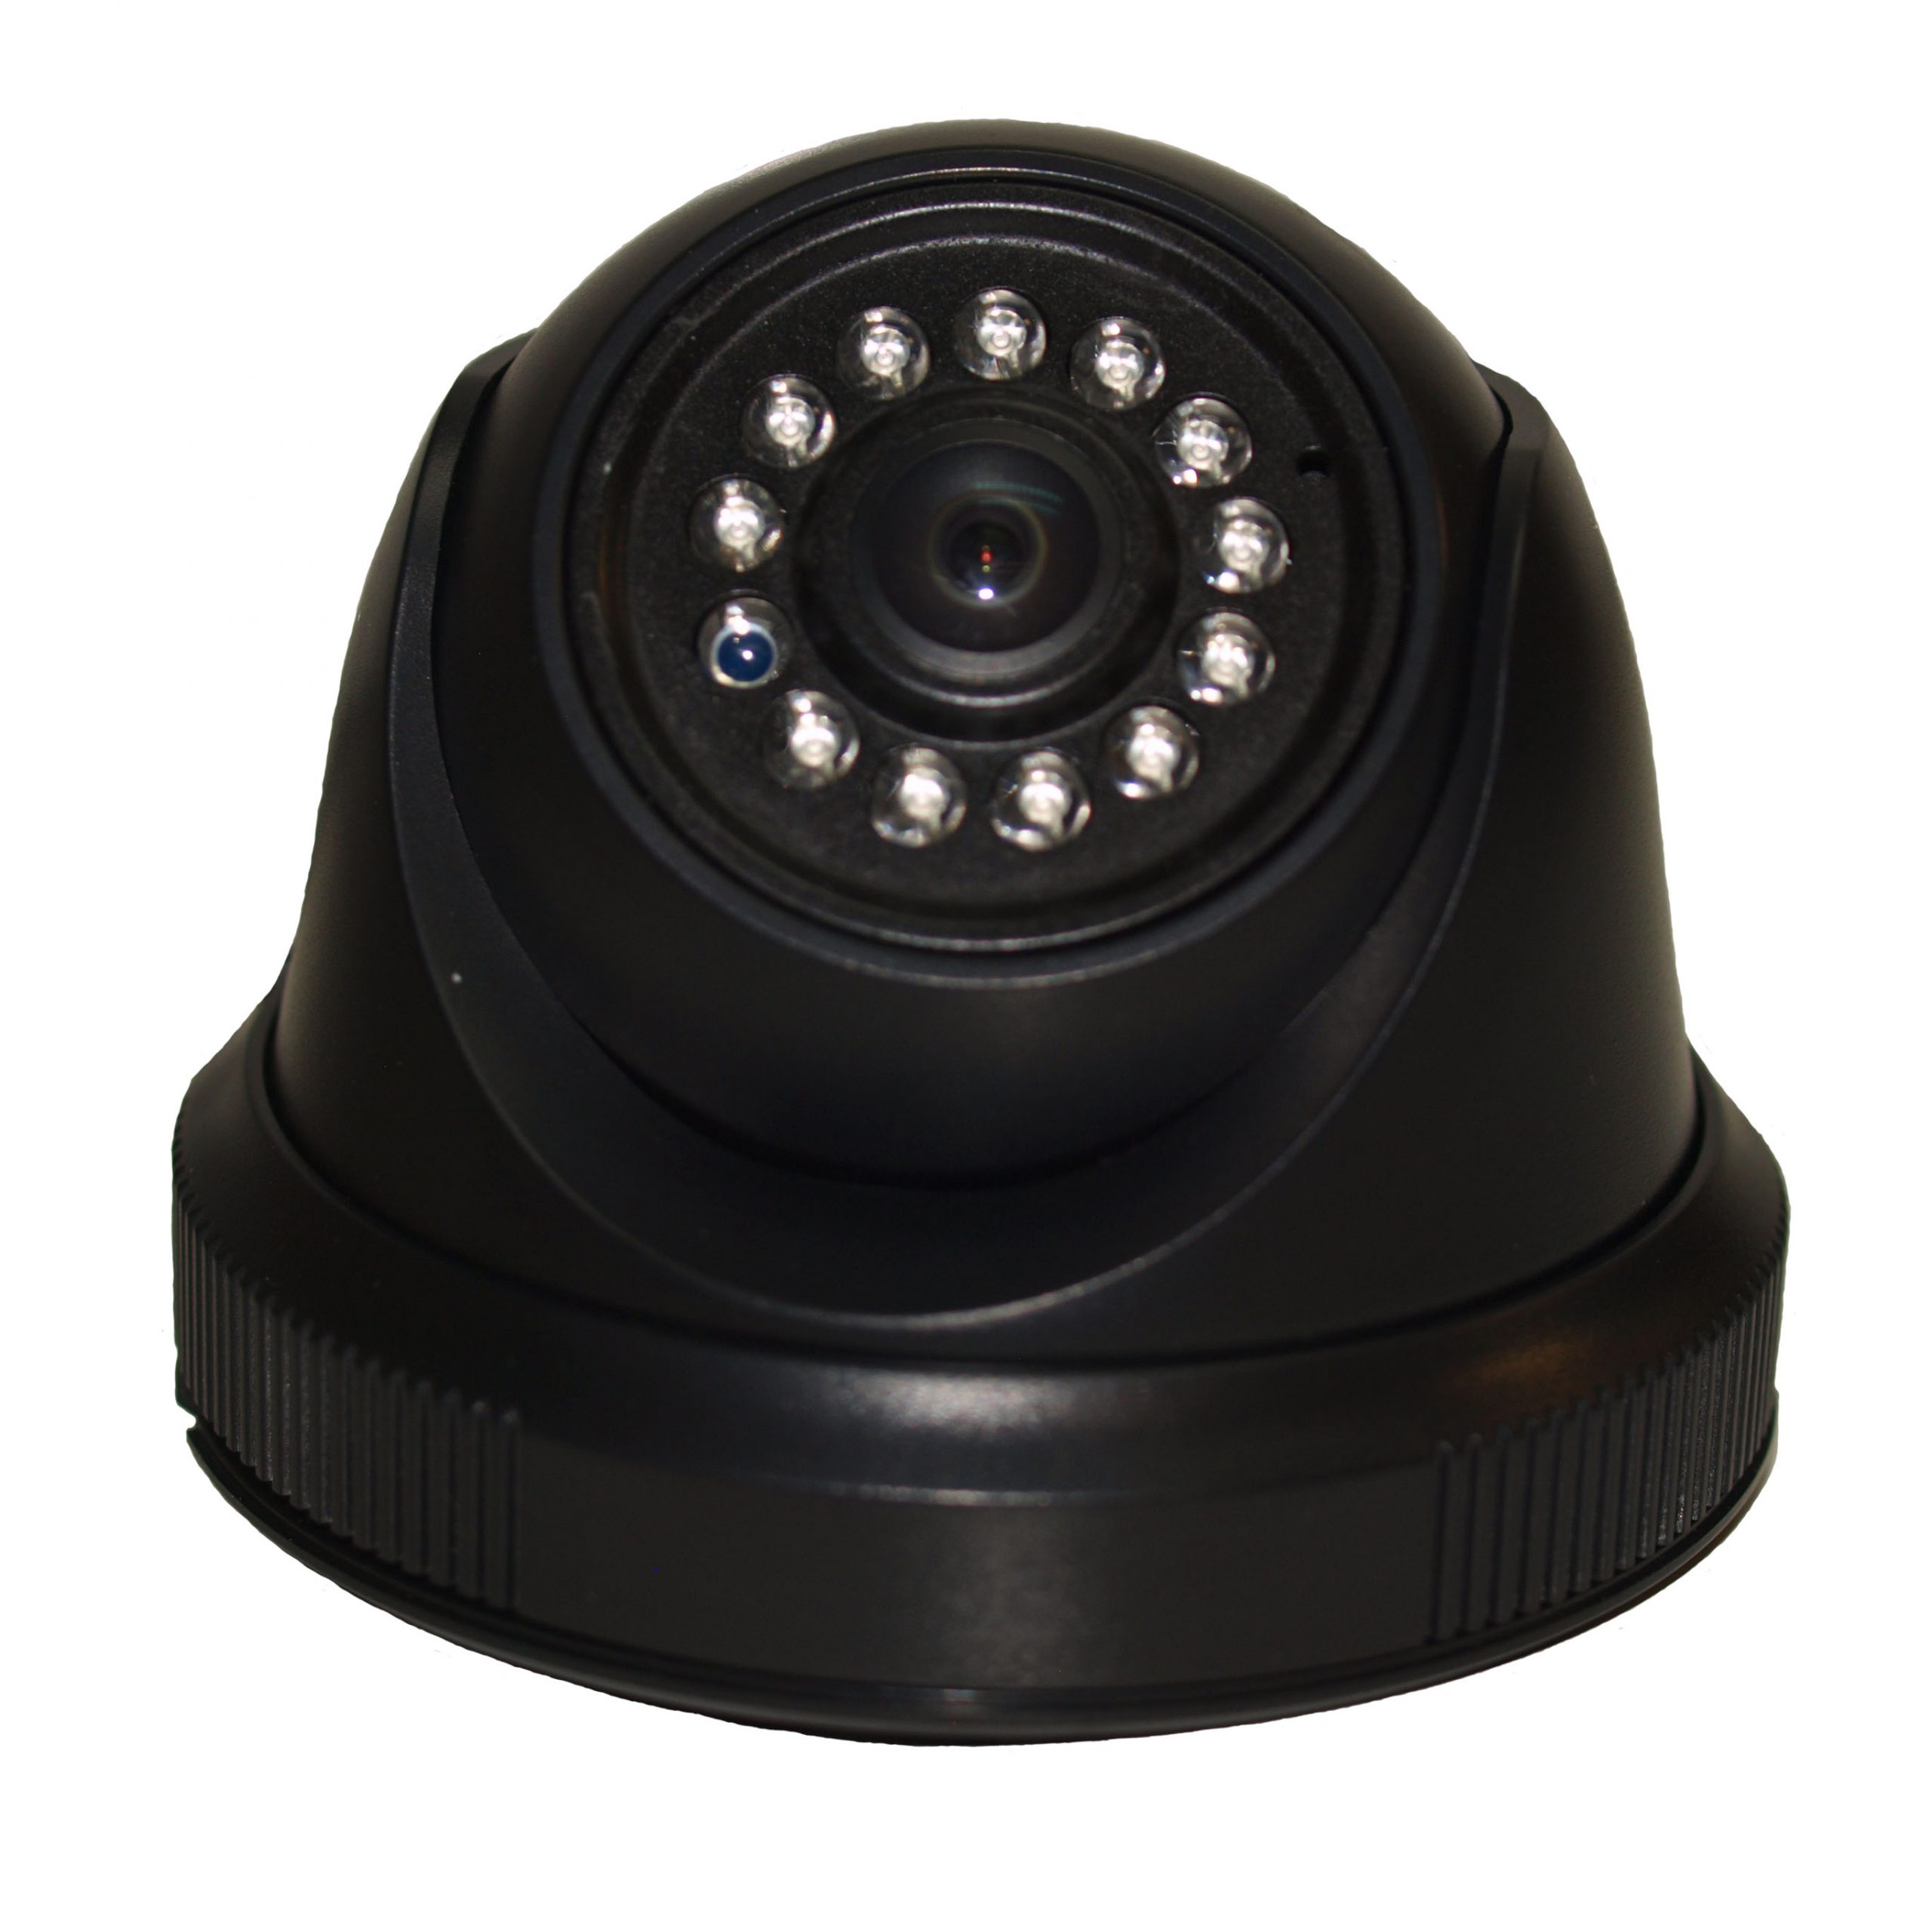 Front of BW601 Dome Camera